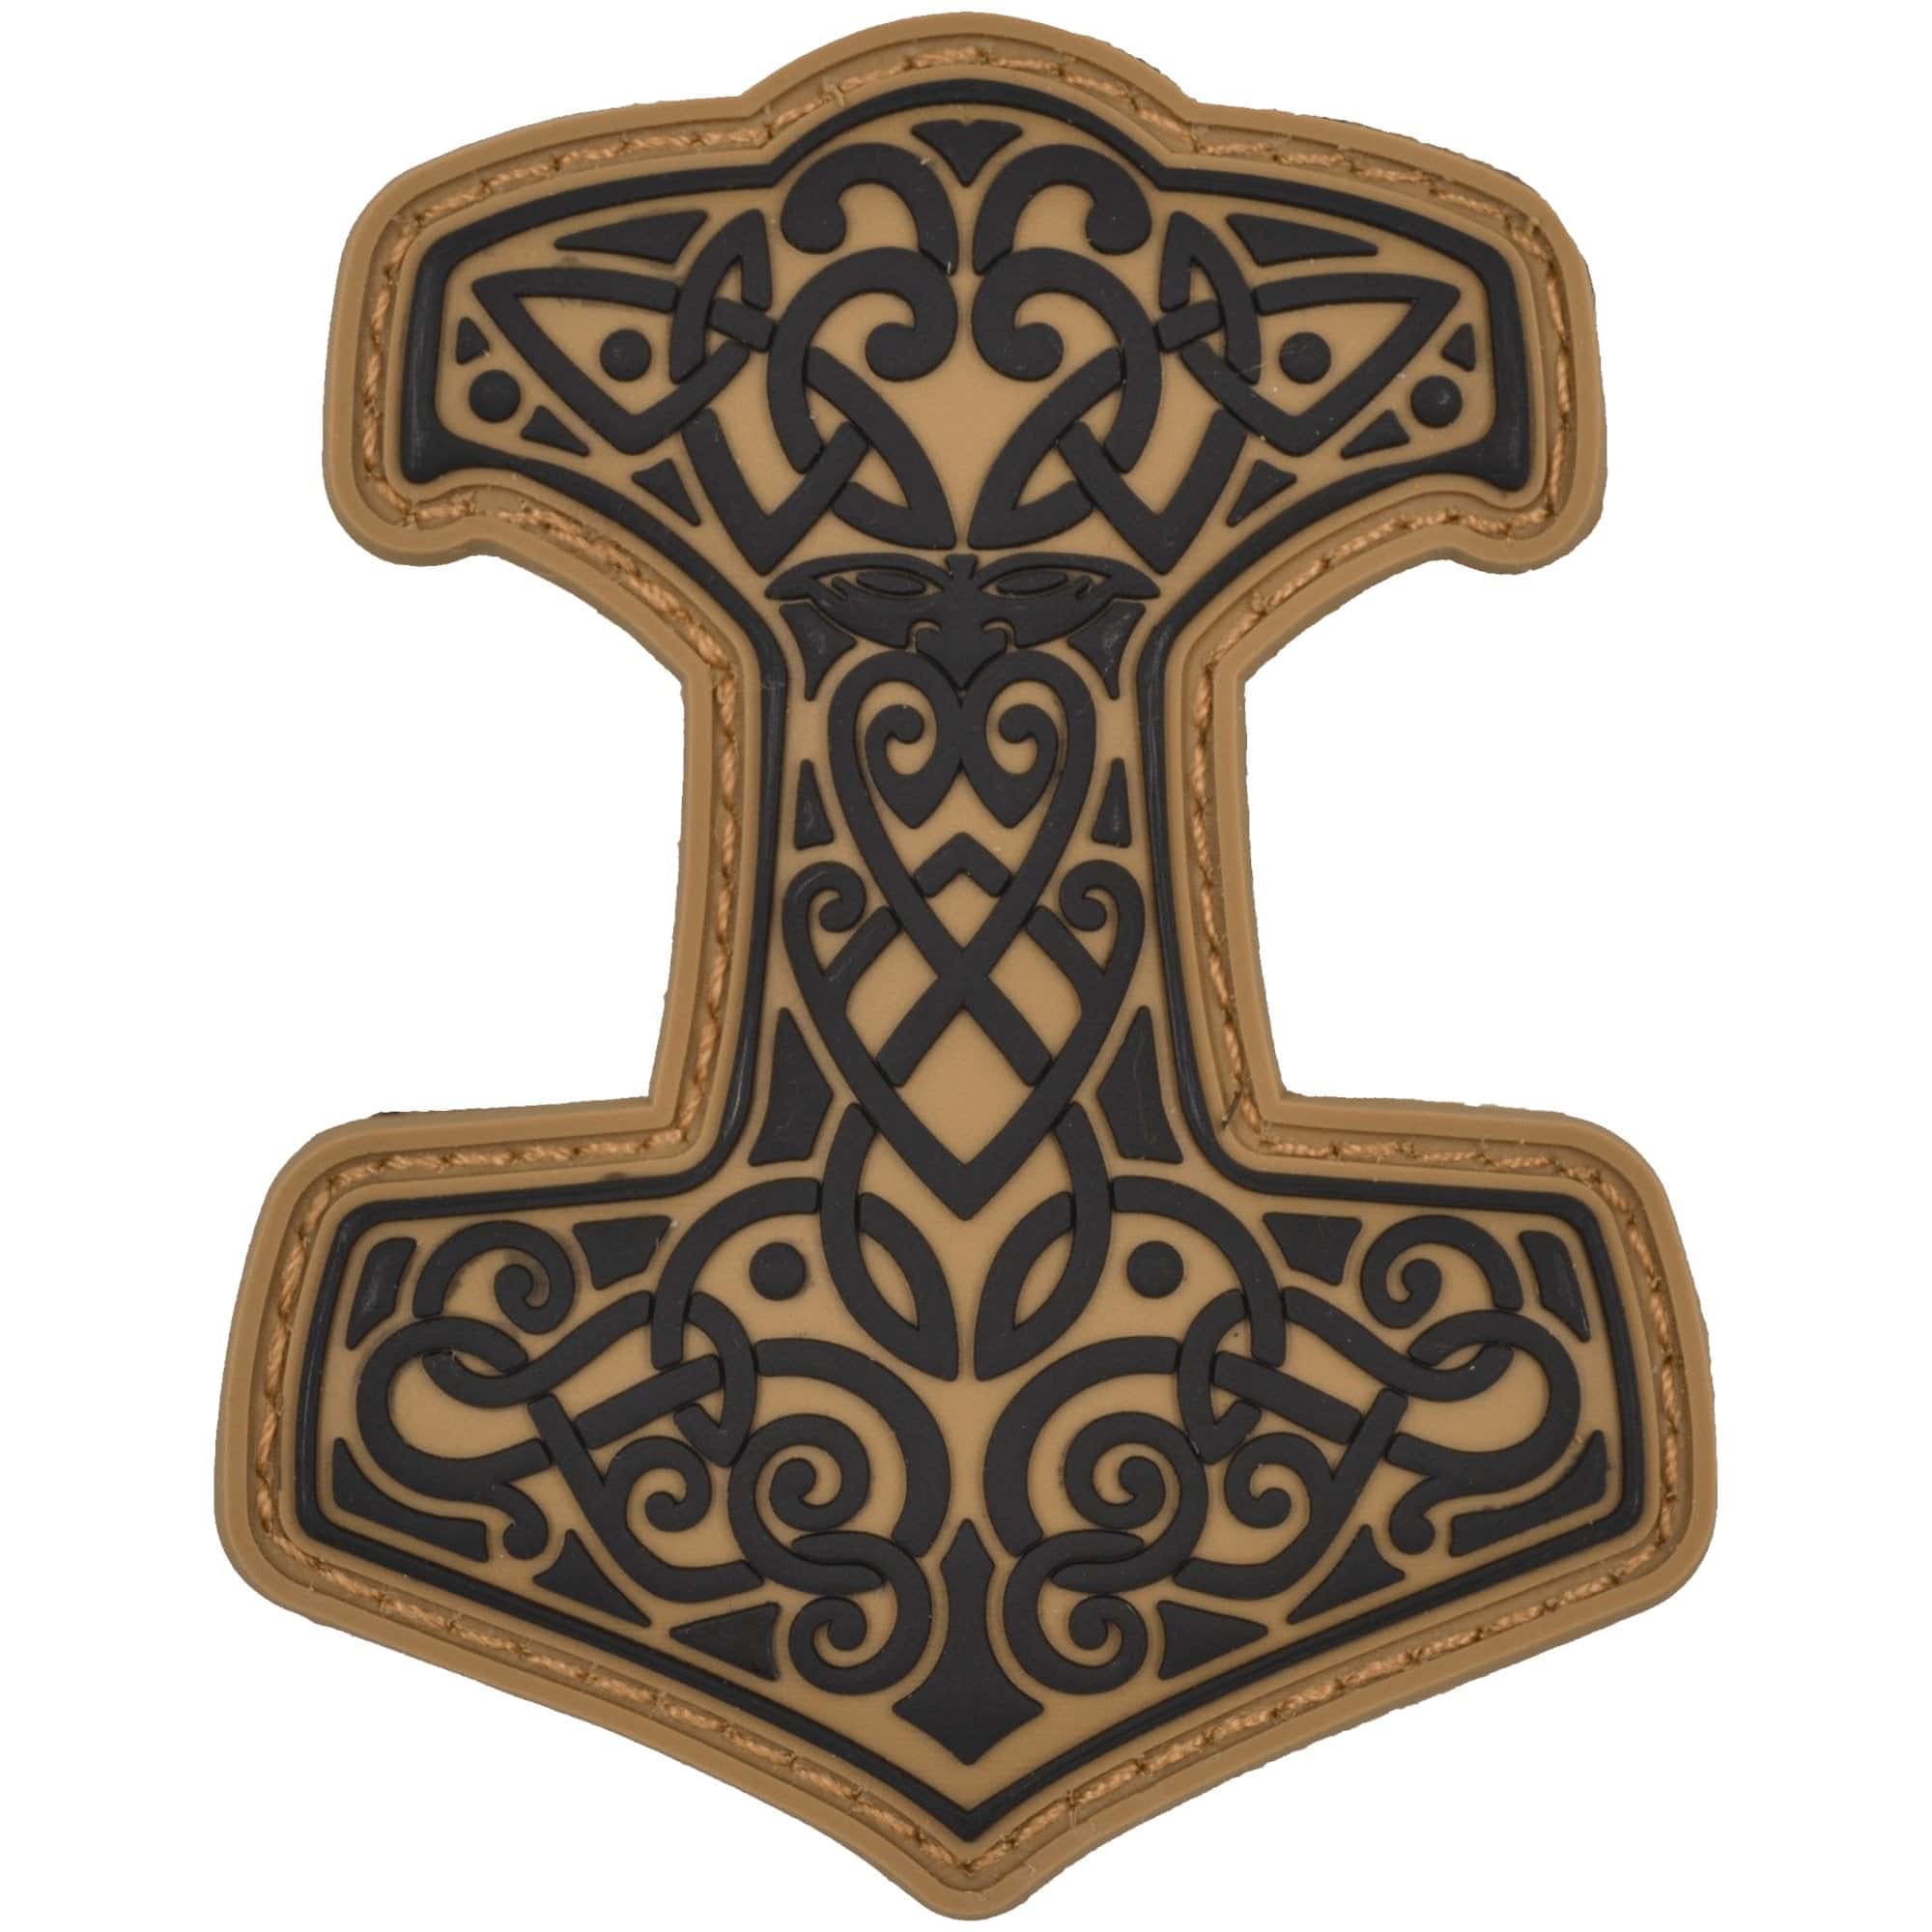 Tactical Gear Junkie Patches Coyote Brown w/ Black Mjölnir Thor's Hammer Norse Viking - 2.5x3 PVC Patch - Multiple Colors